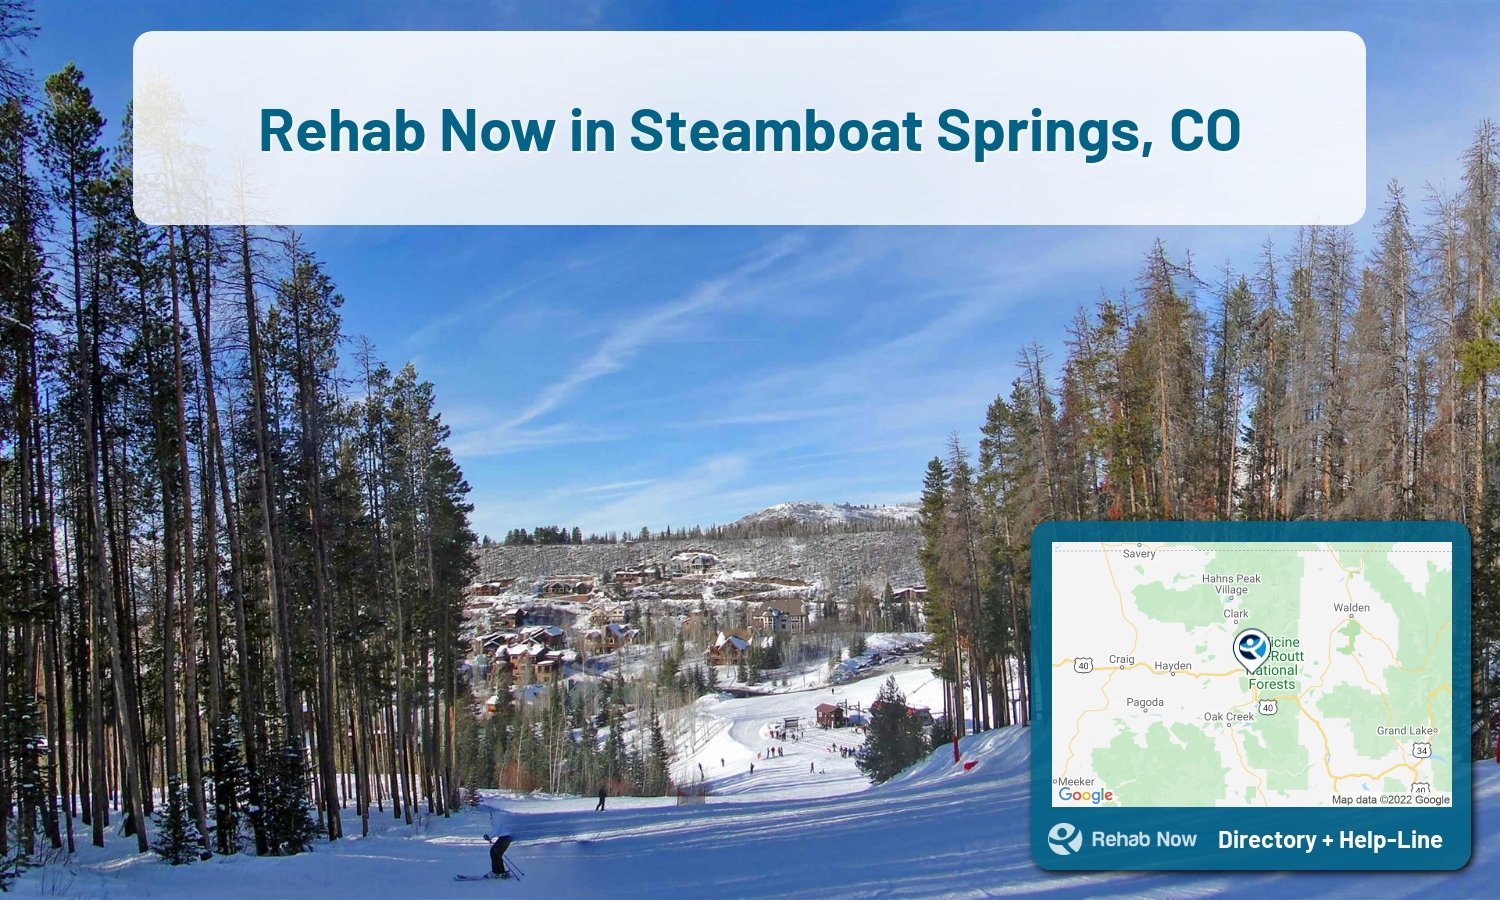 Need treatment nearby in Steamboat Springs, Colorado? Choose a drug/alcohol rehab center from our list, or call our hotline now for free help.